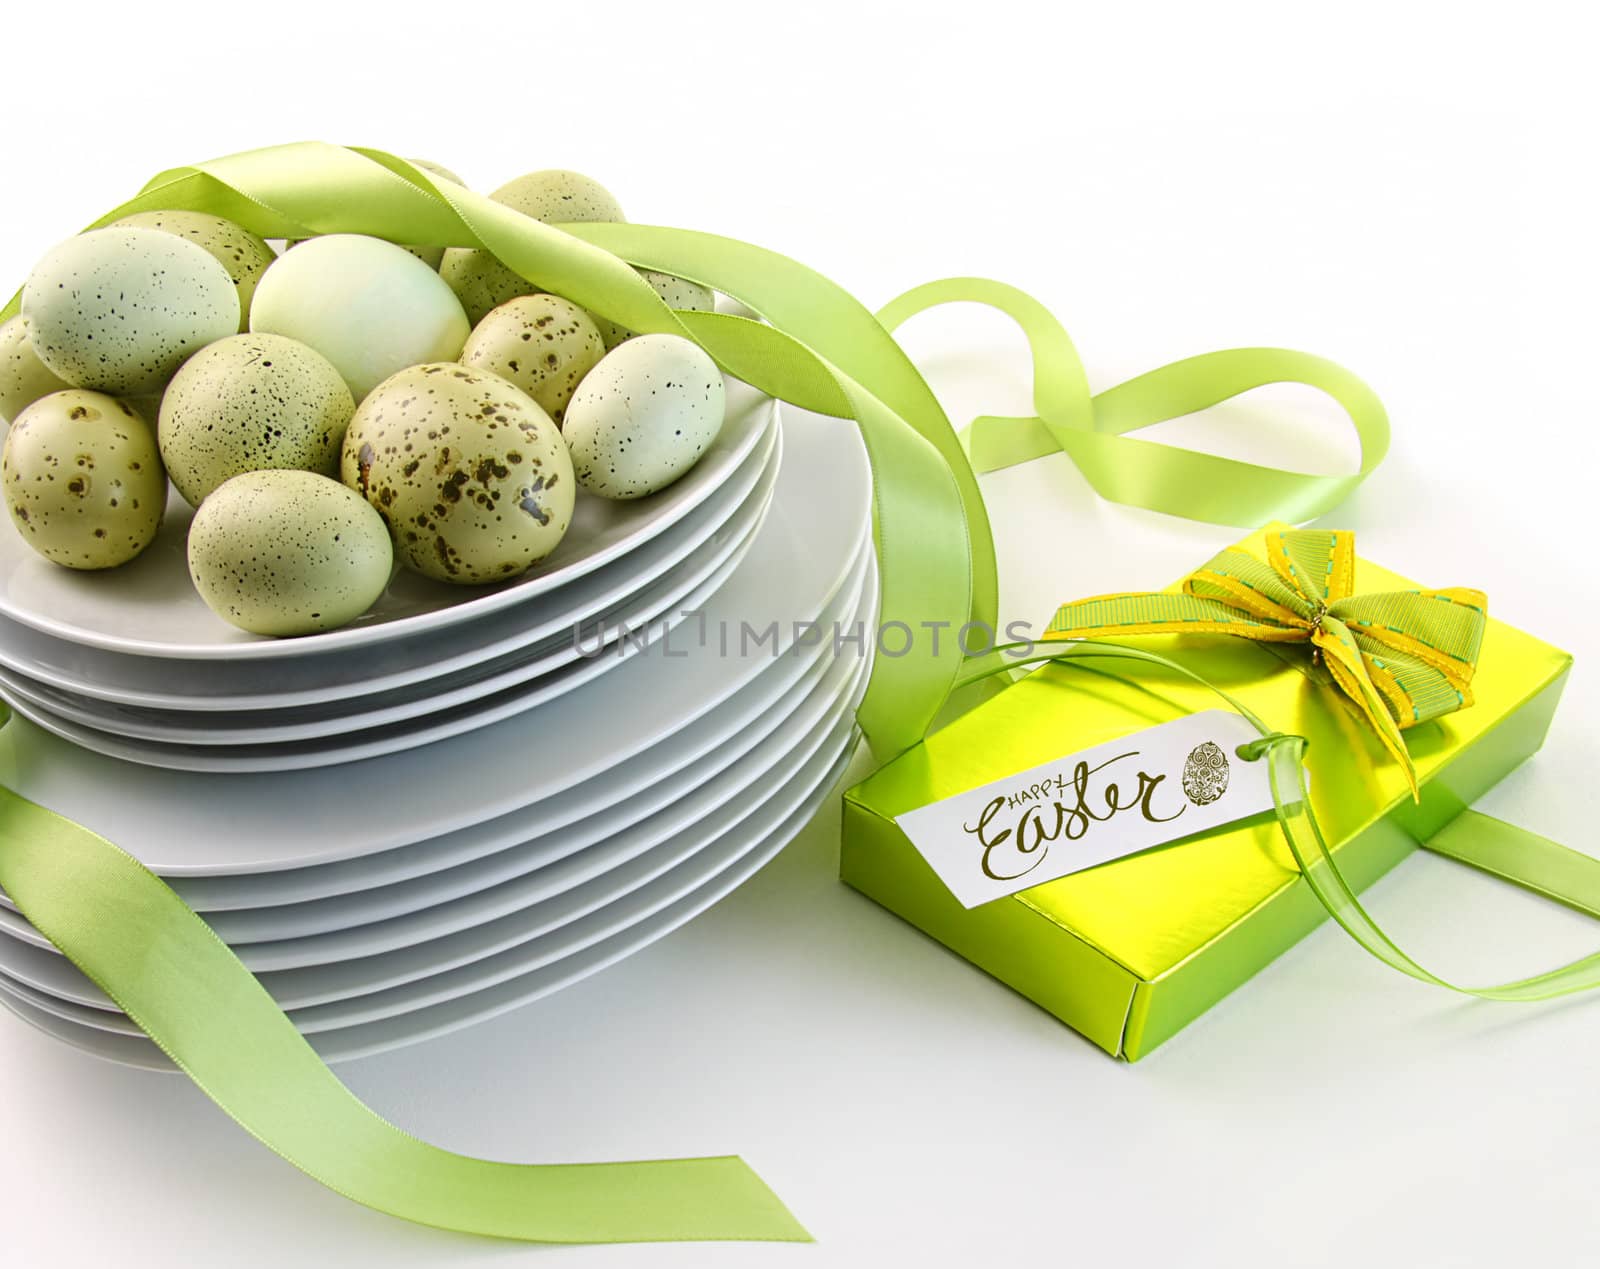 Easter eggs on plates with ribbons and gift by Sandralise